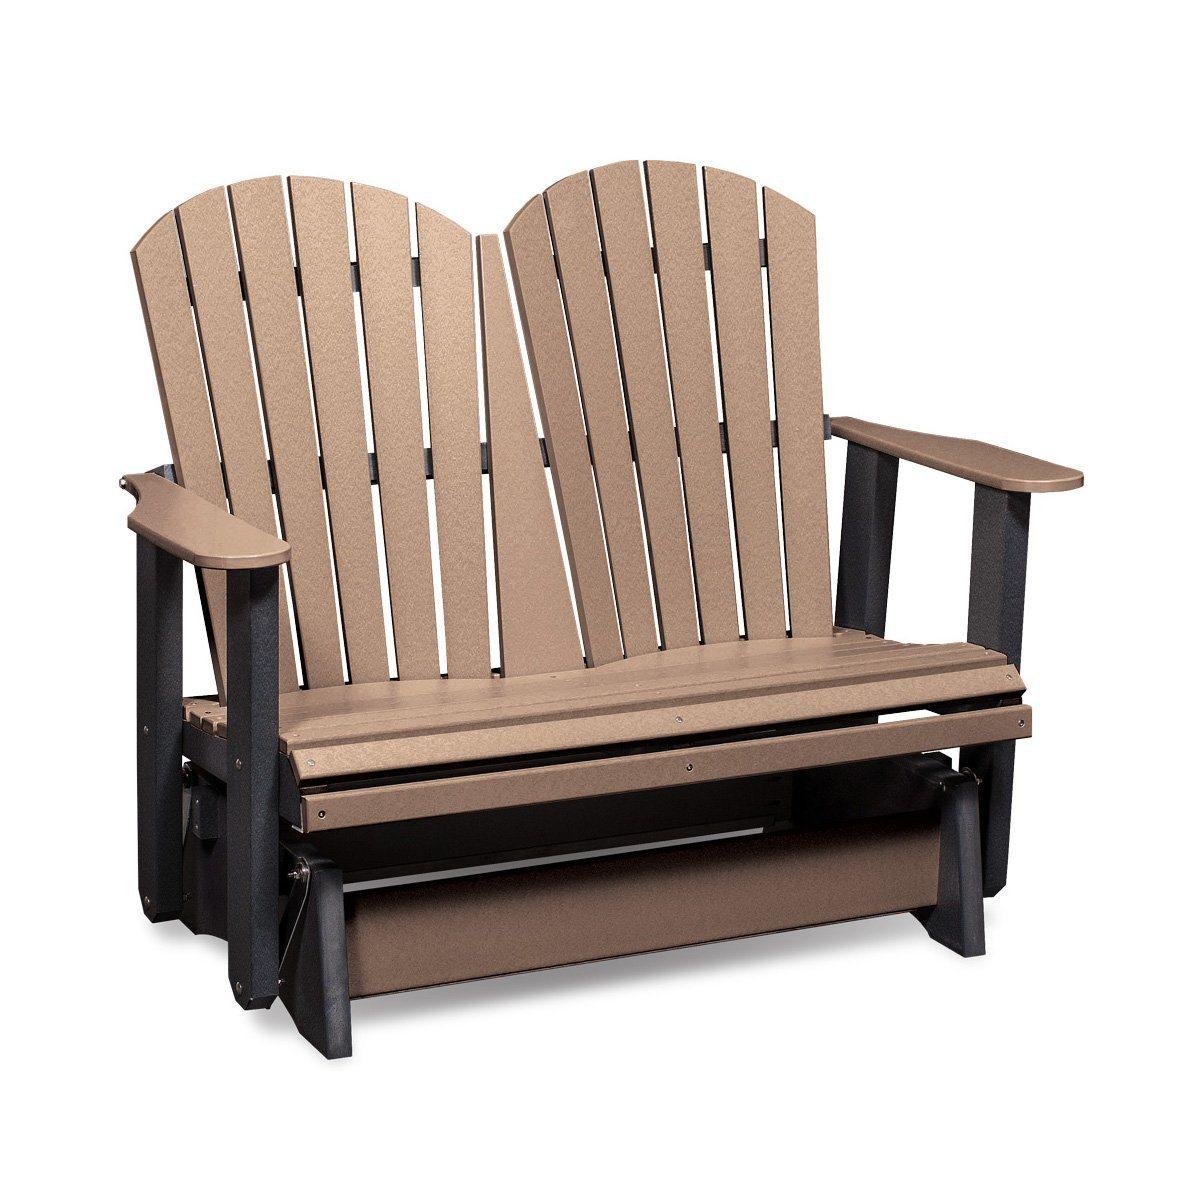 Recycled Poly Double Glider - Express Outdoor Furniture Simply Amish Weathered Wood and Black 